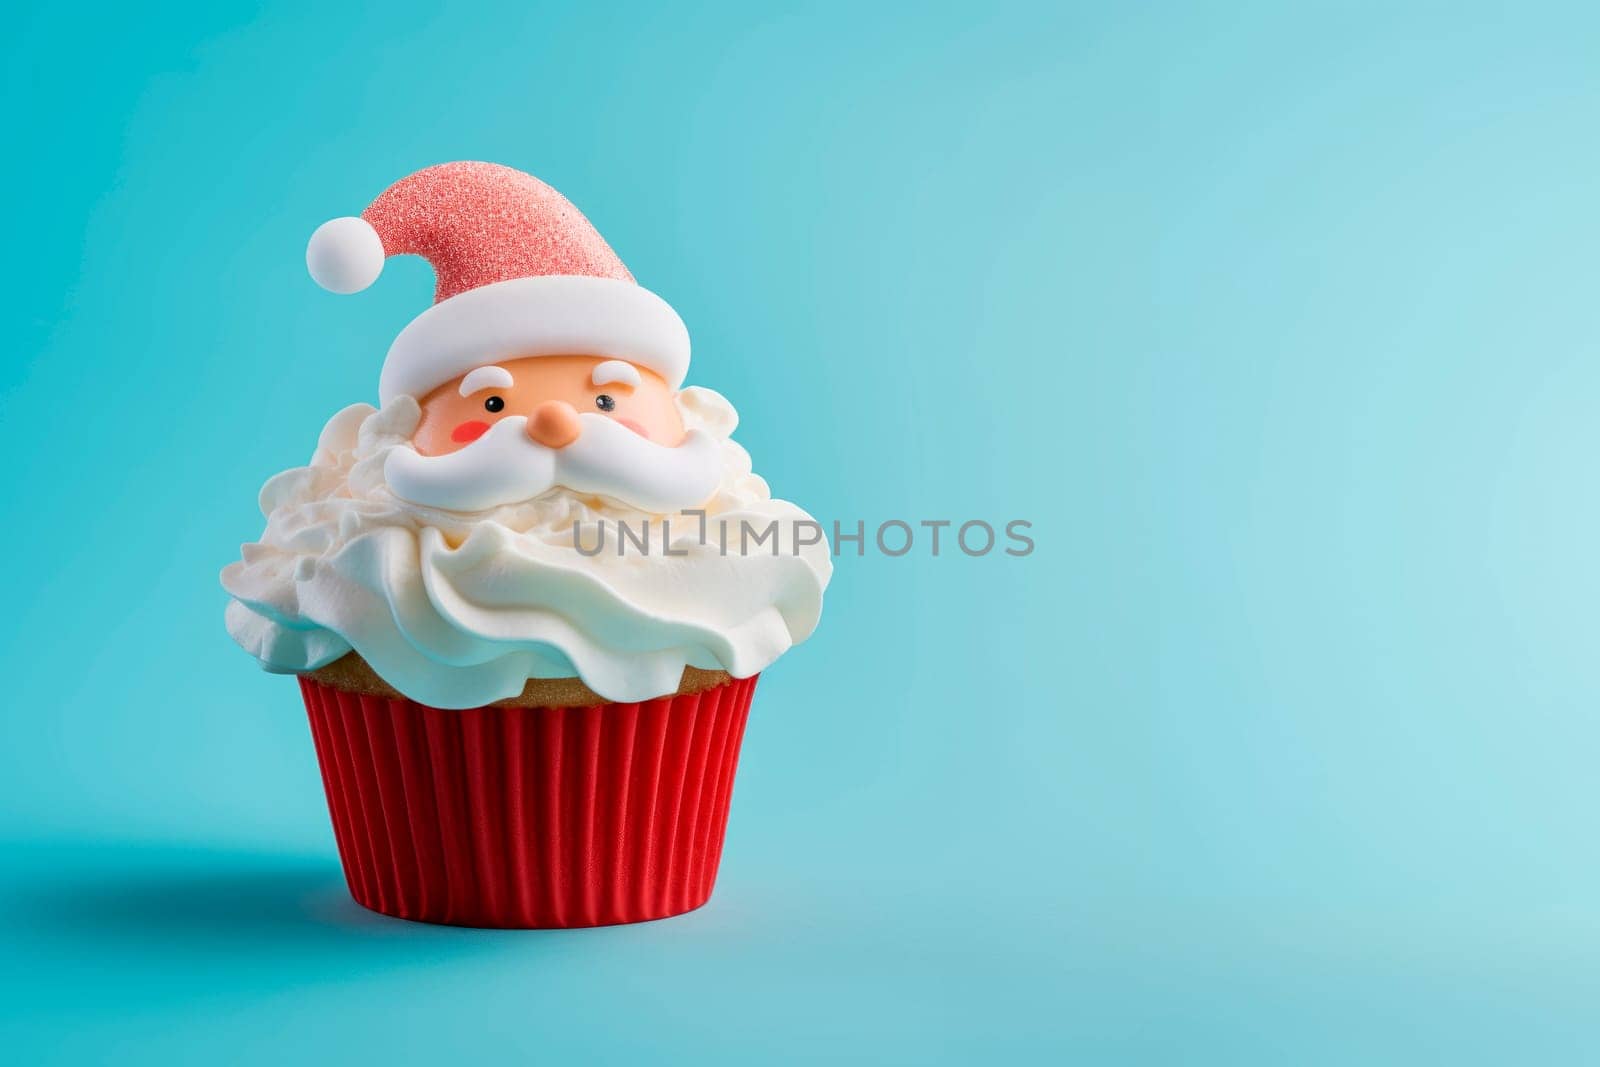 Unusual Christmas desserts. The concept of Christmas decor. New Year's pastries.